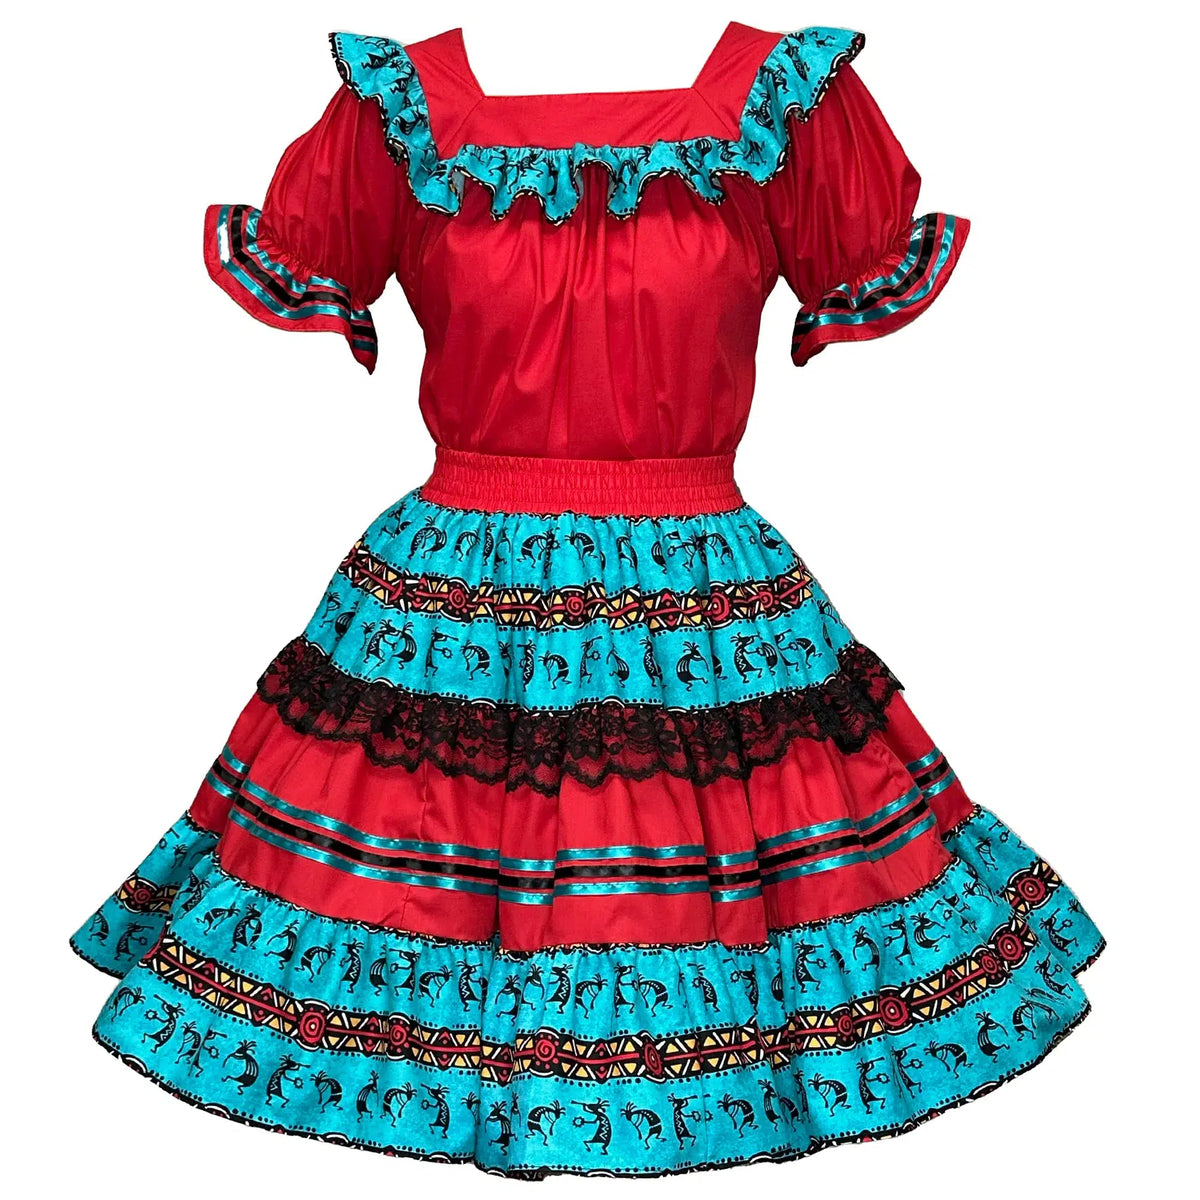 Kokopelli Square Dance Outfit